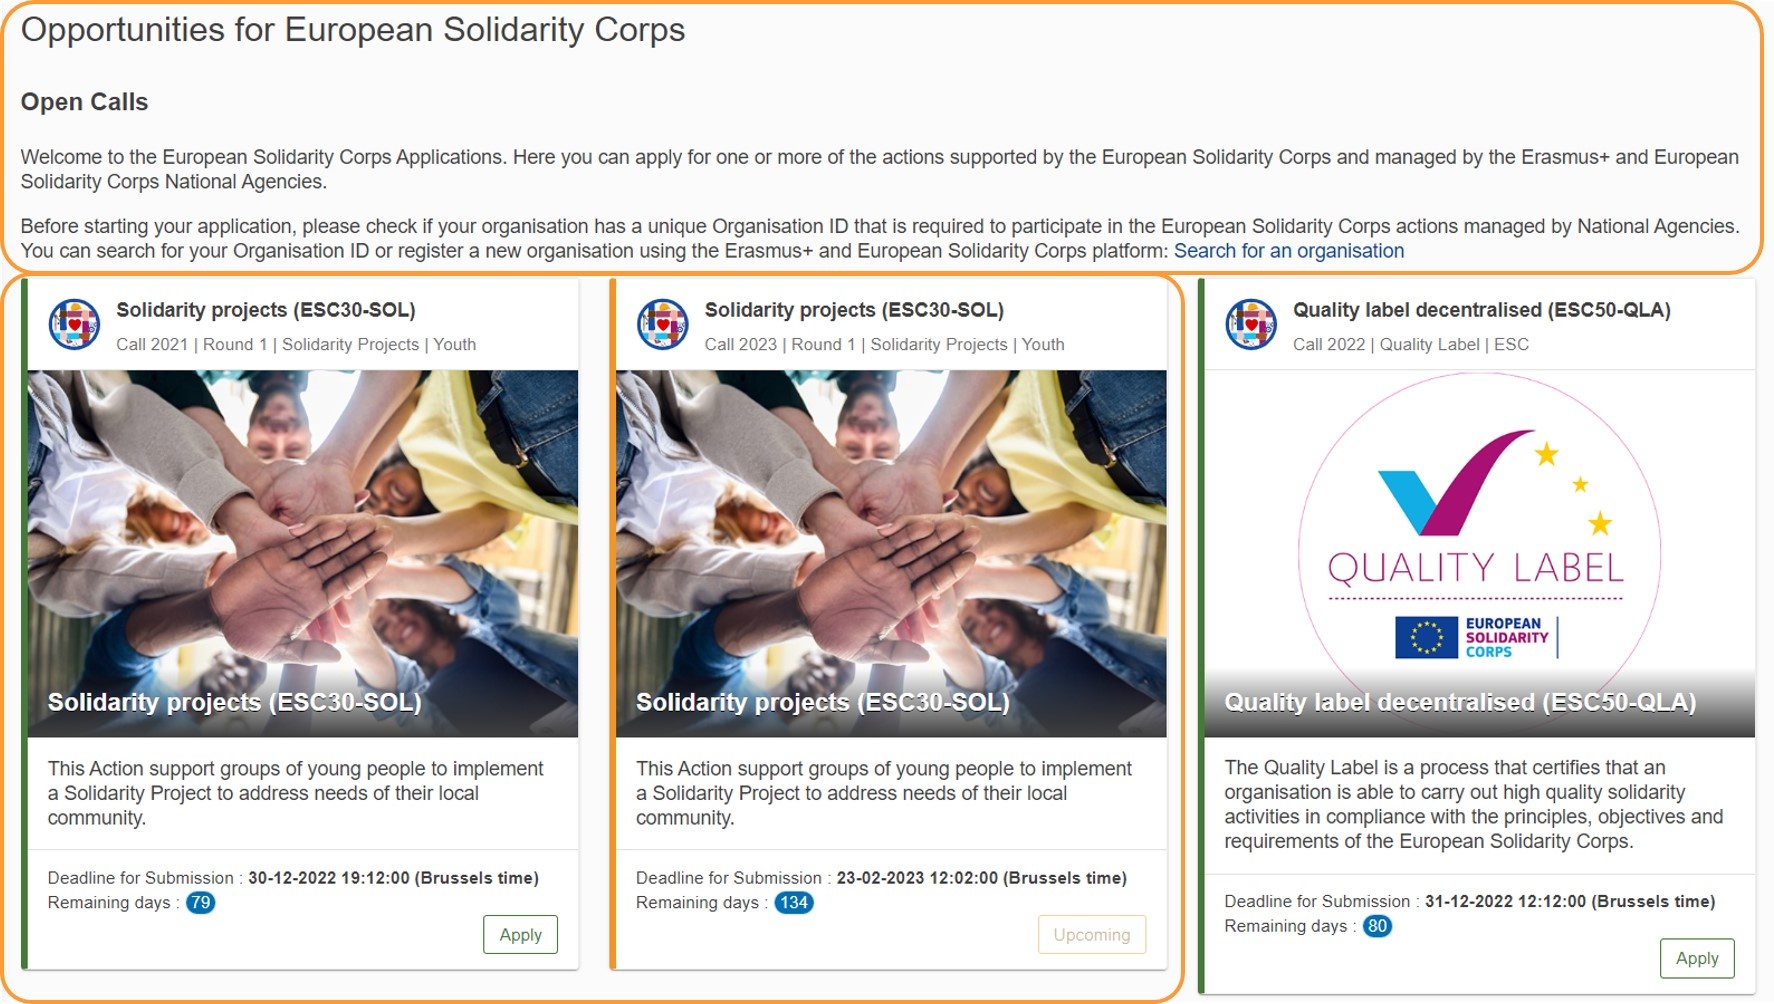 Opportunities for European Solidarity Corps page